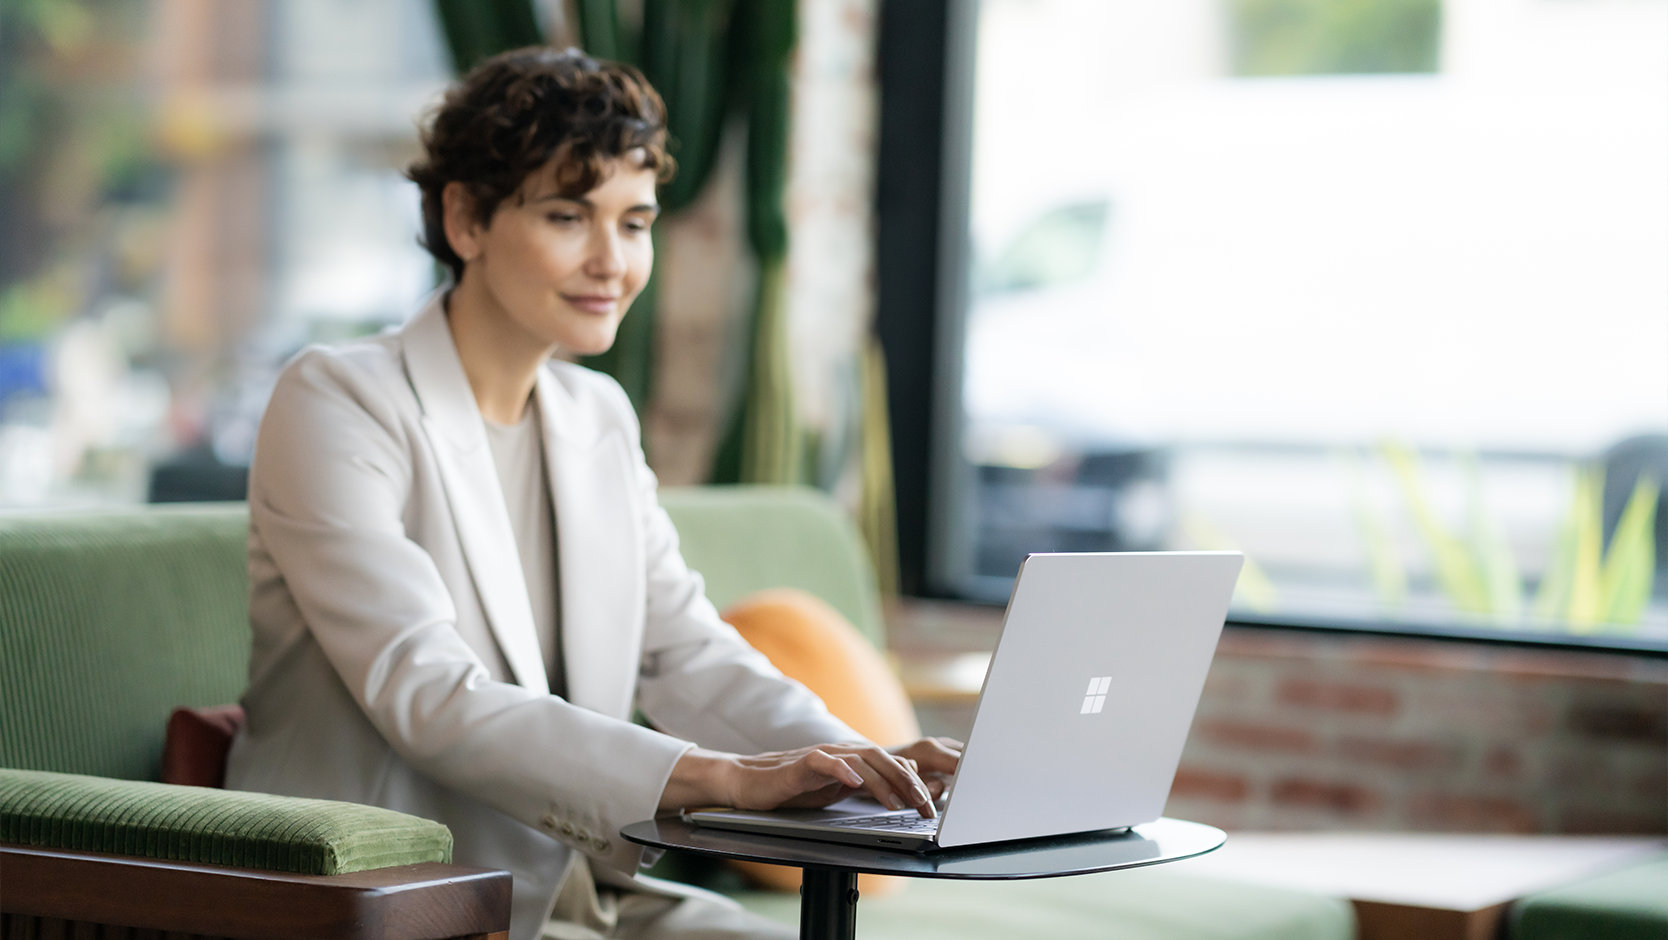 A person in a business suit uses Surface Laptop 6 for Business in a public space, suggesting the security of the device.